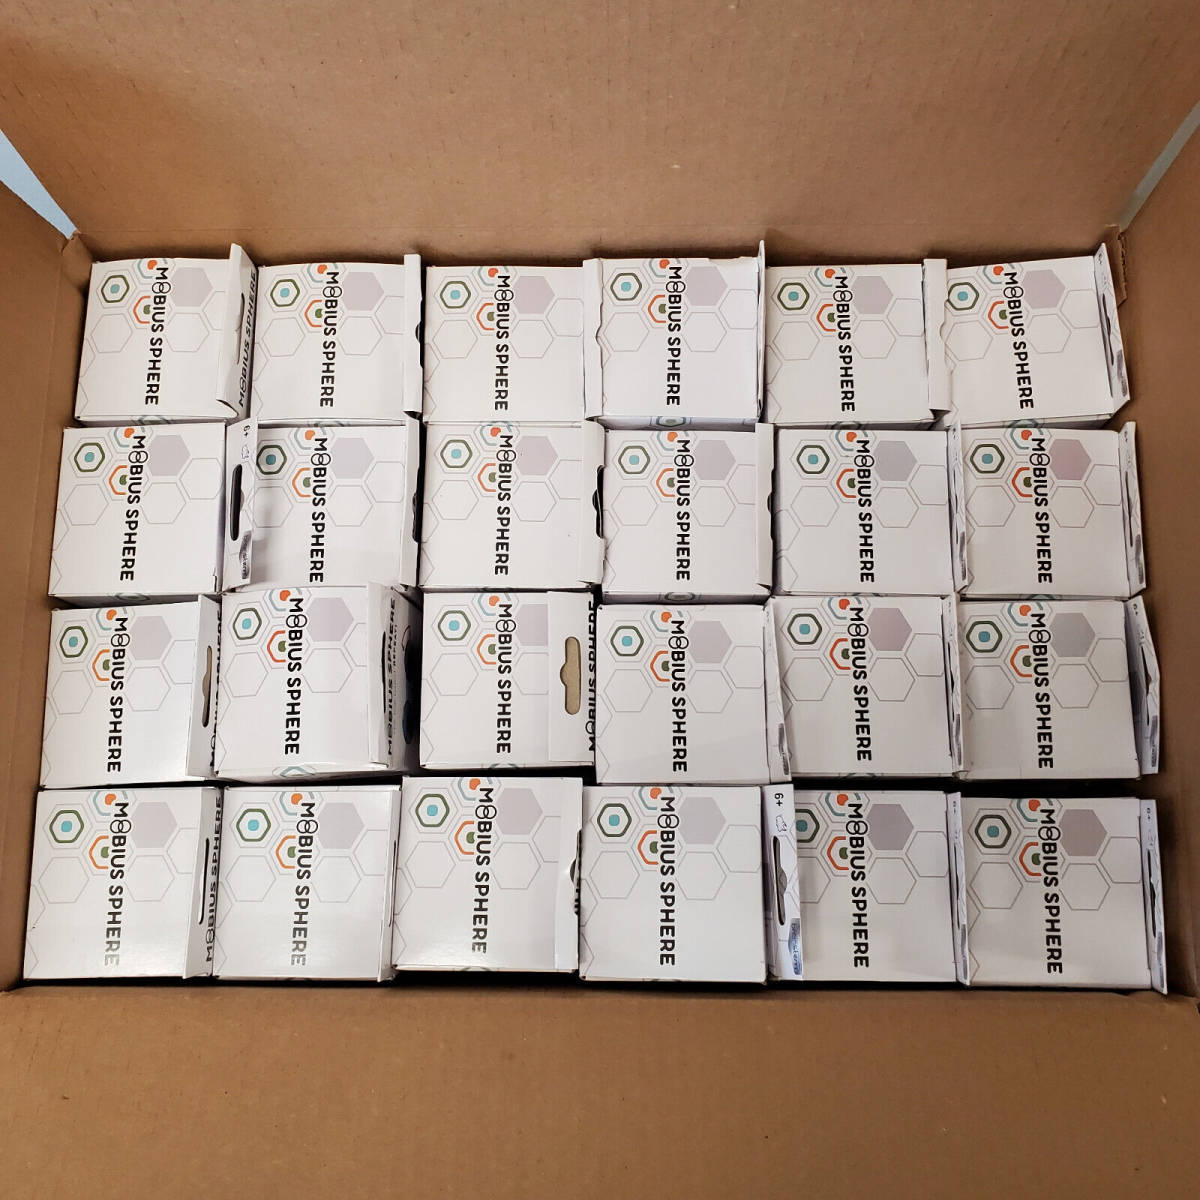 Brainstem Mobius Sphere Wholesale Mixed Lot of 72 NEW Boxes 海外 即決